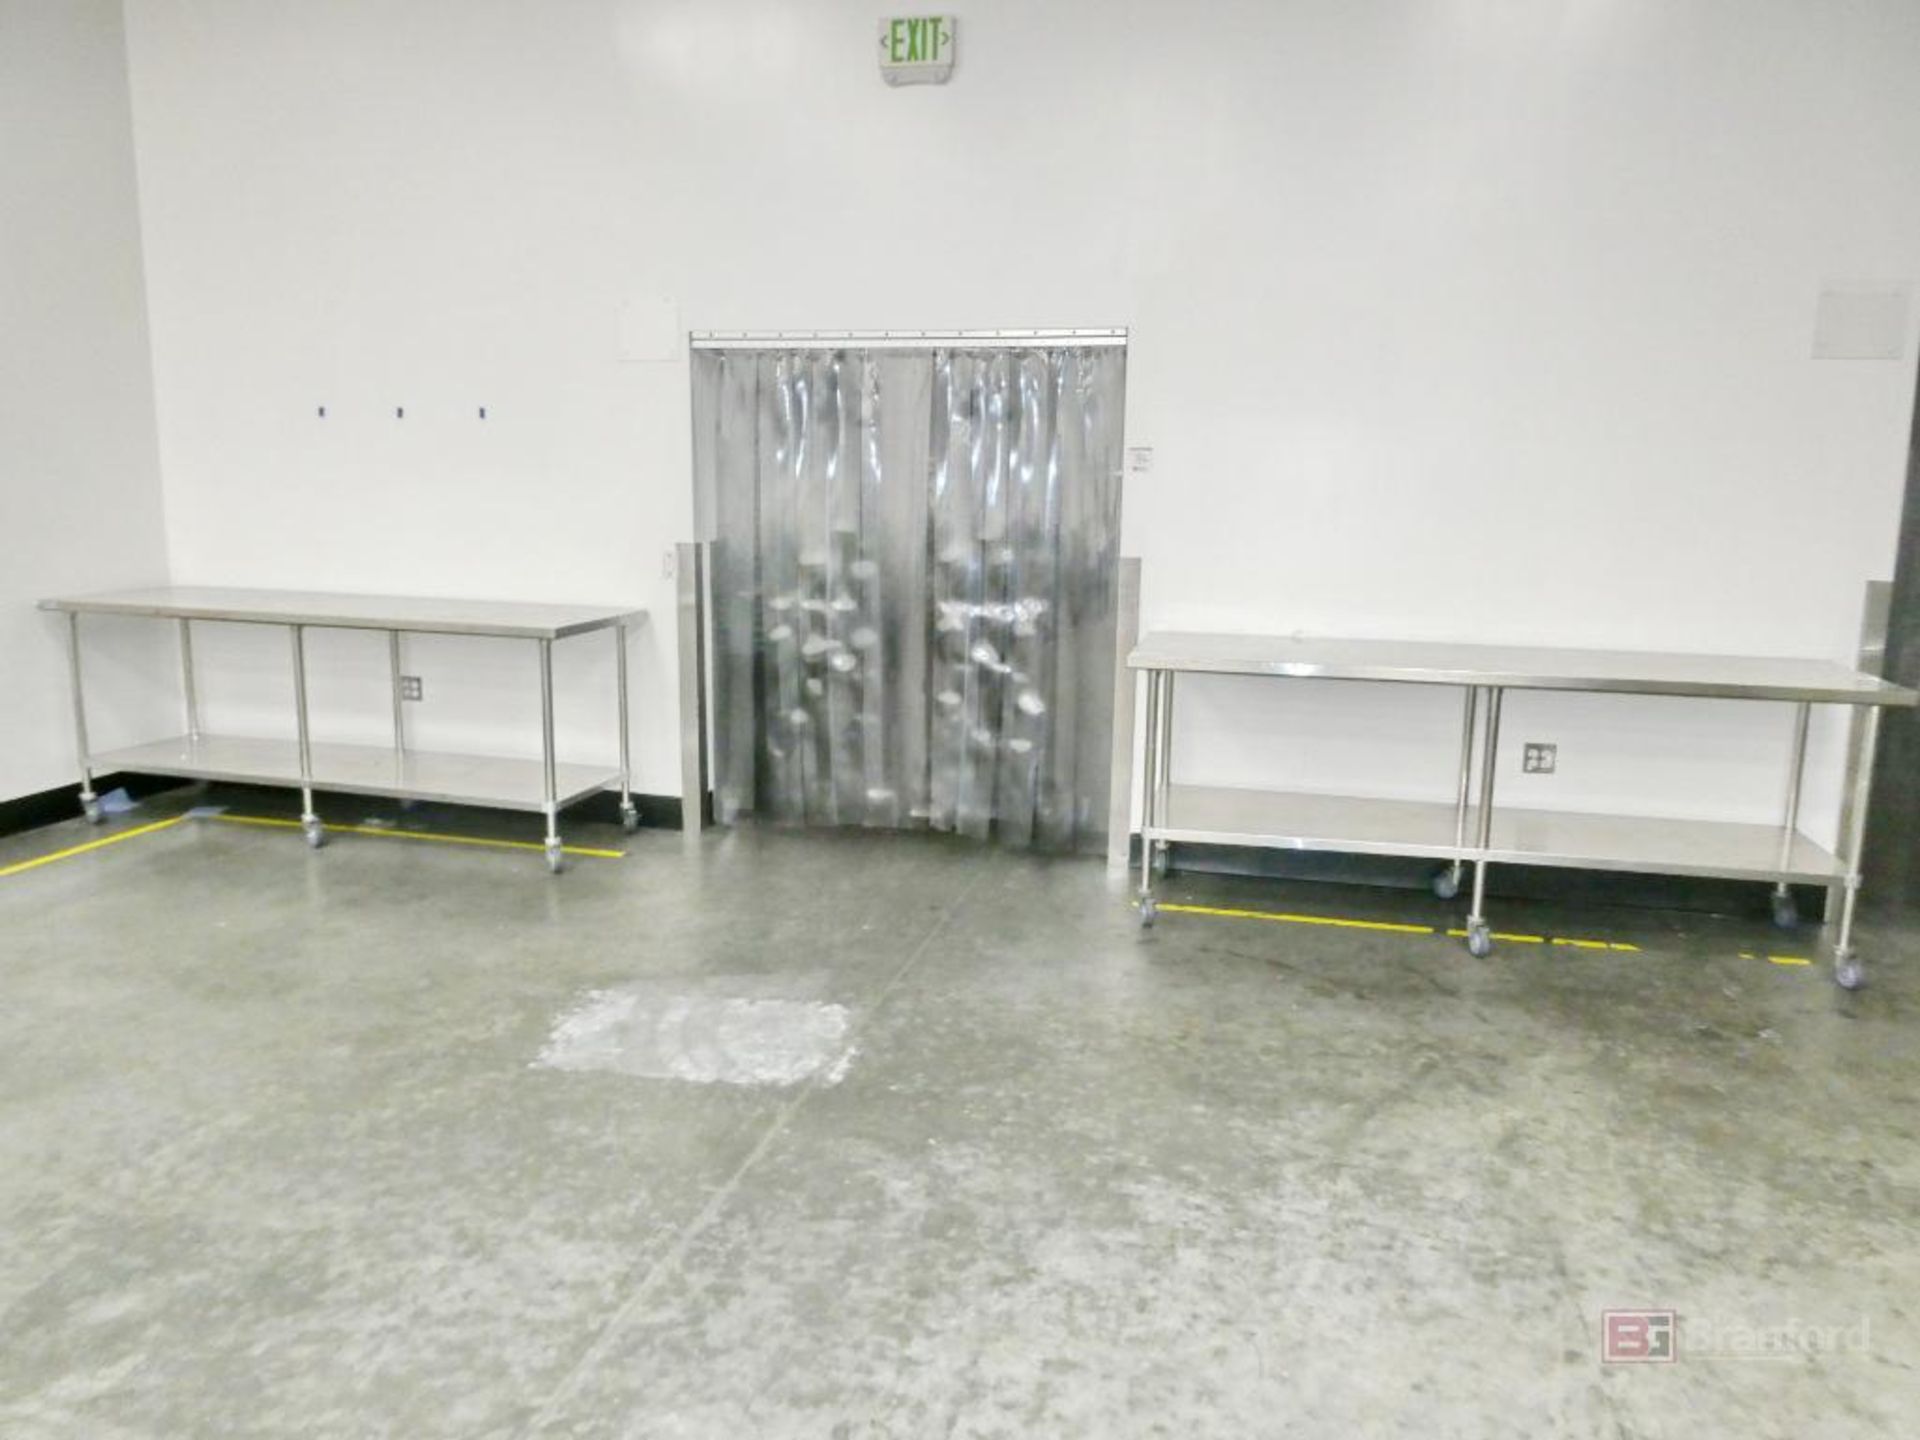 (2) 2-Tier Stainless Steel Tables w/ Casters